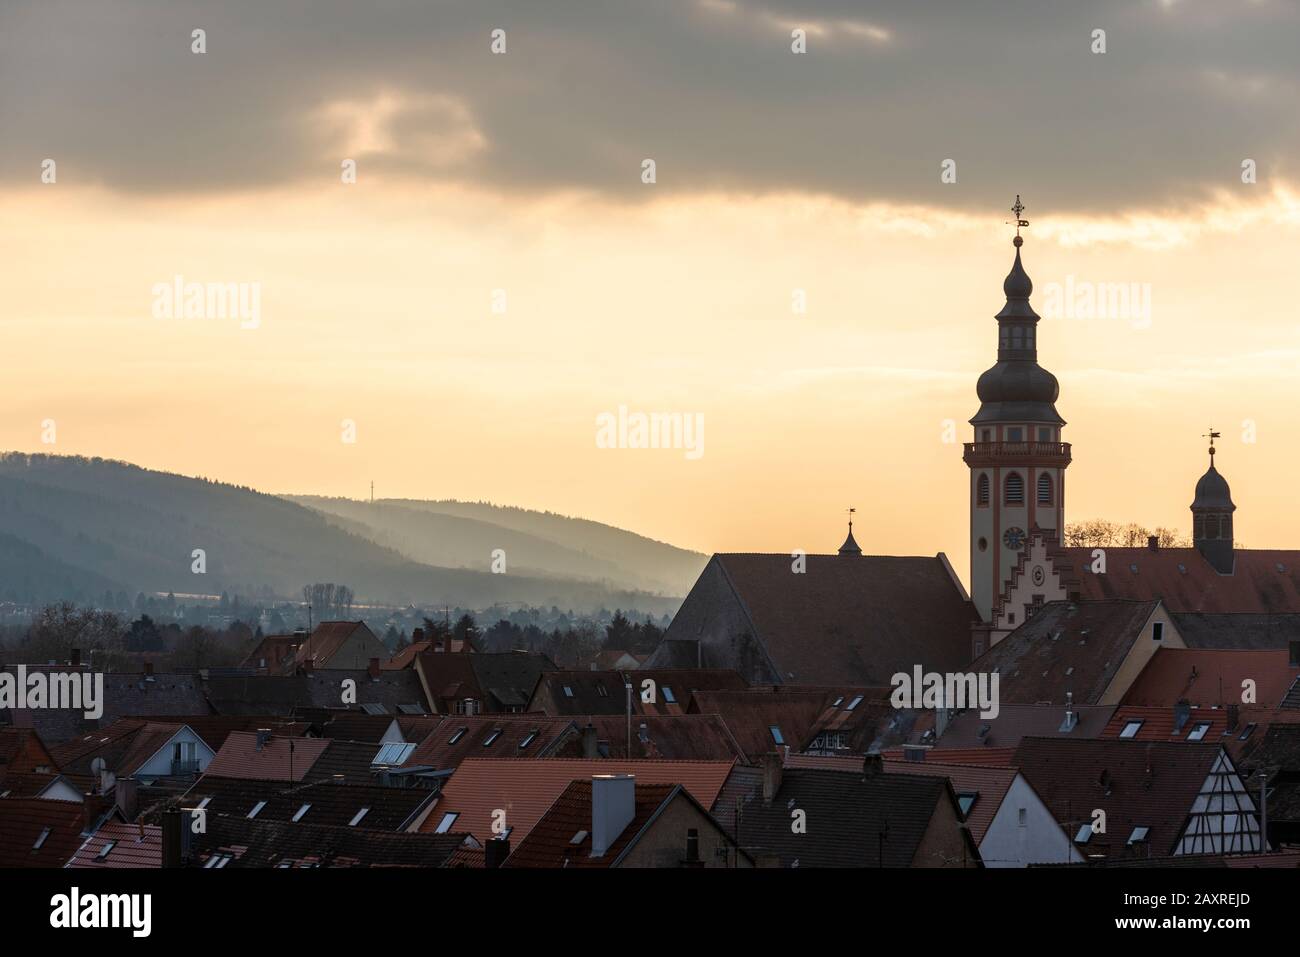 Germany, Baden-Württemberg, Karlsruhe, district Durlach, city silhouette in backlight. Evangelical town church and Rahaus. Stock Photo